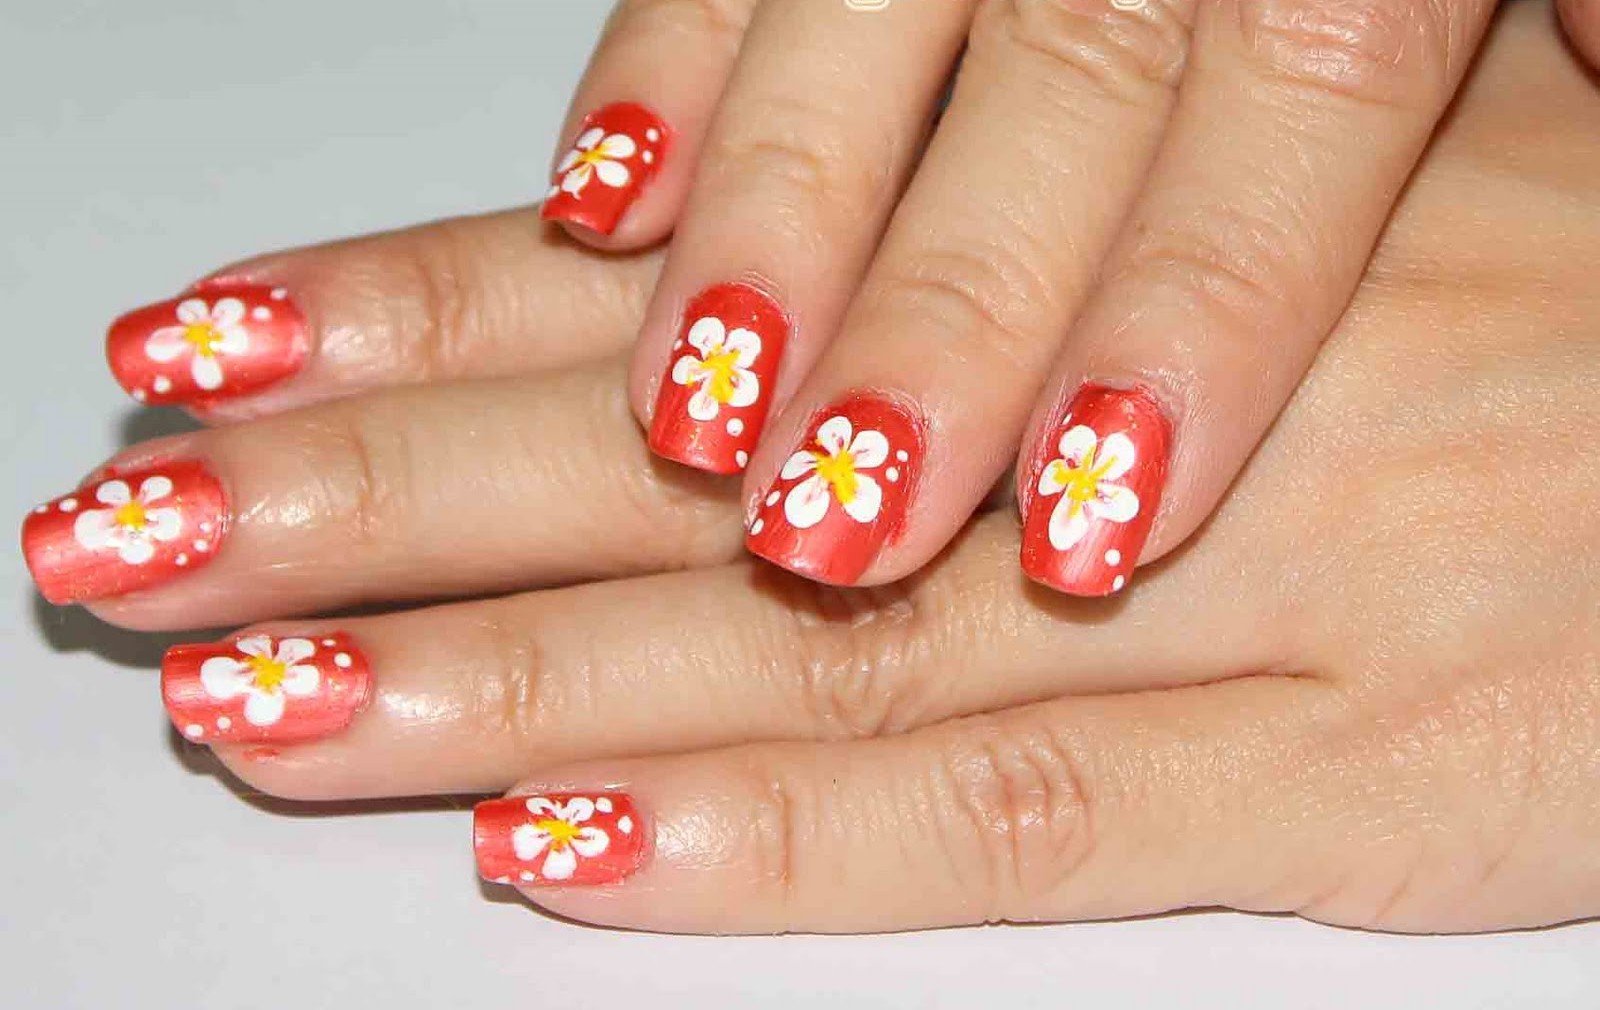 3. "Quick and Easy Nail Art Tutorials" - wide 2